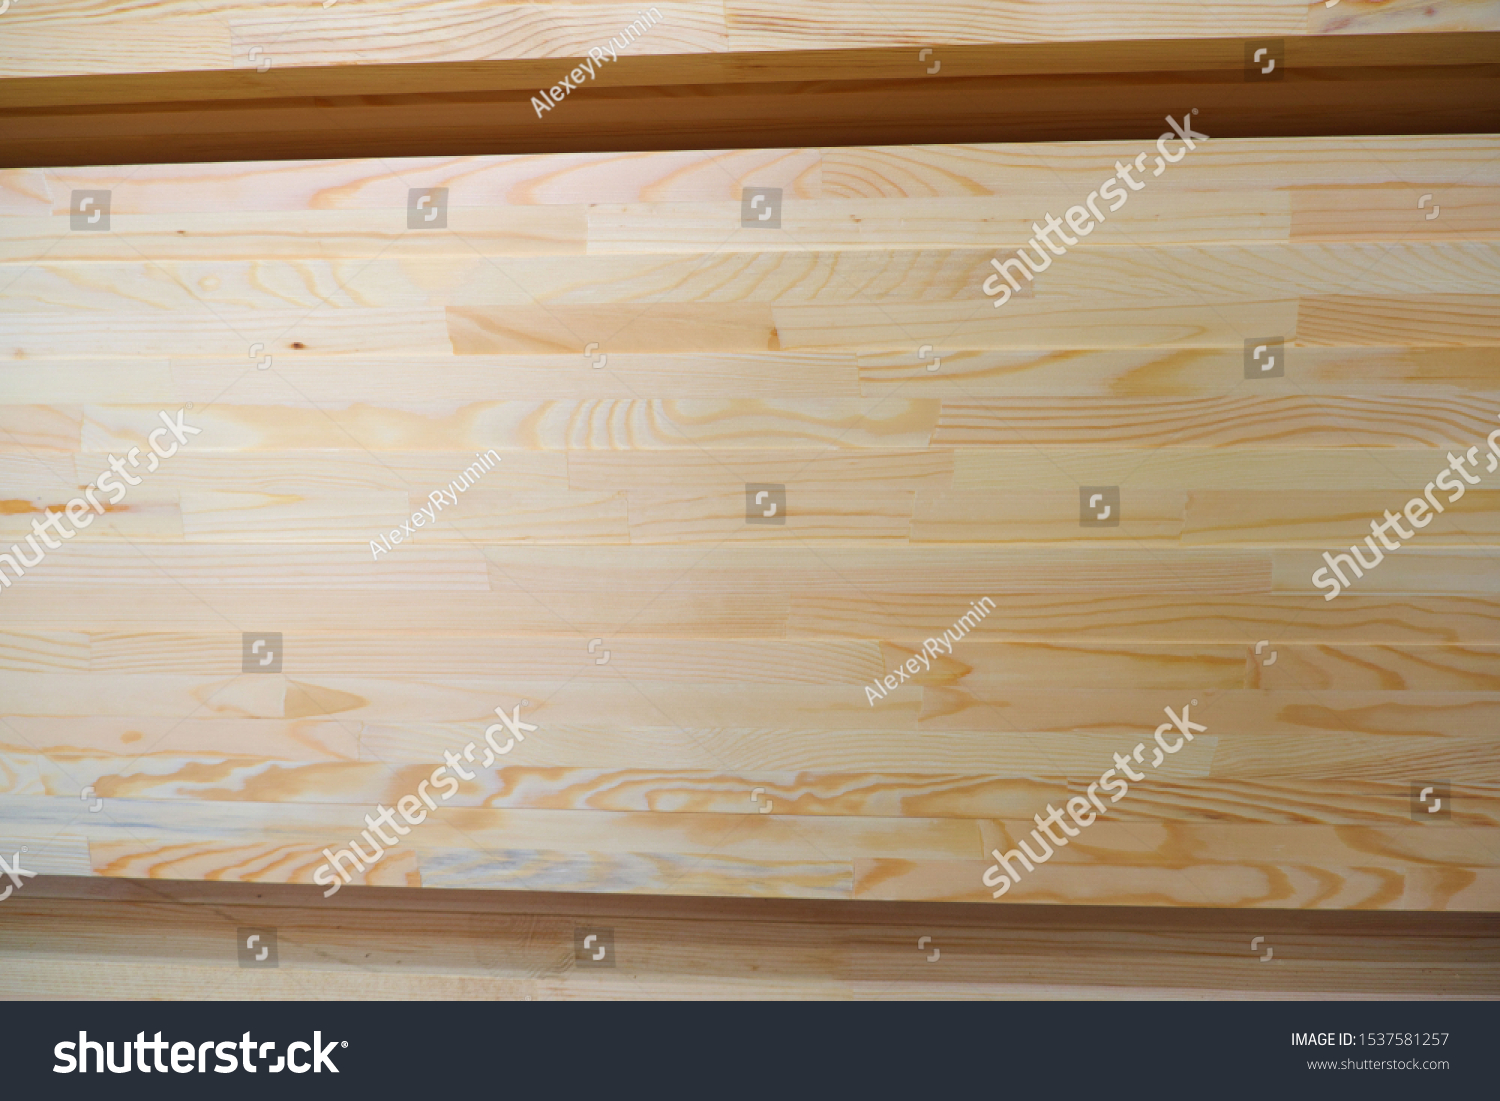 Side view of stack of two-layer wooden glued laminated timber beams from pine finger joint spliced boards for wooden windows